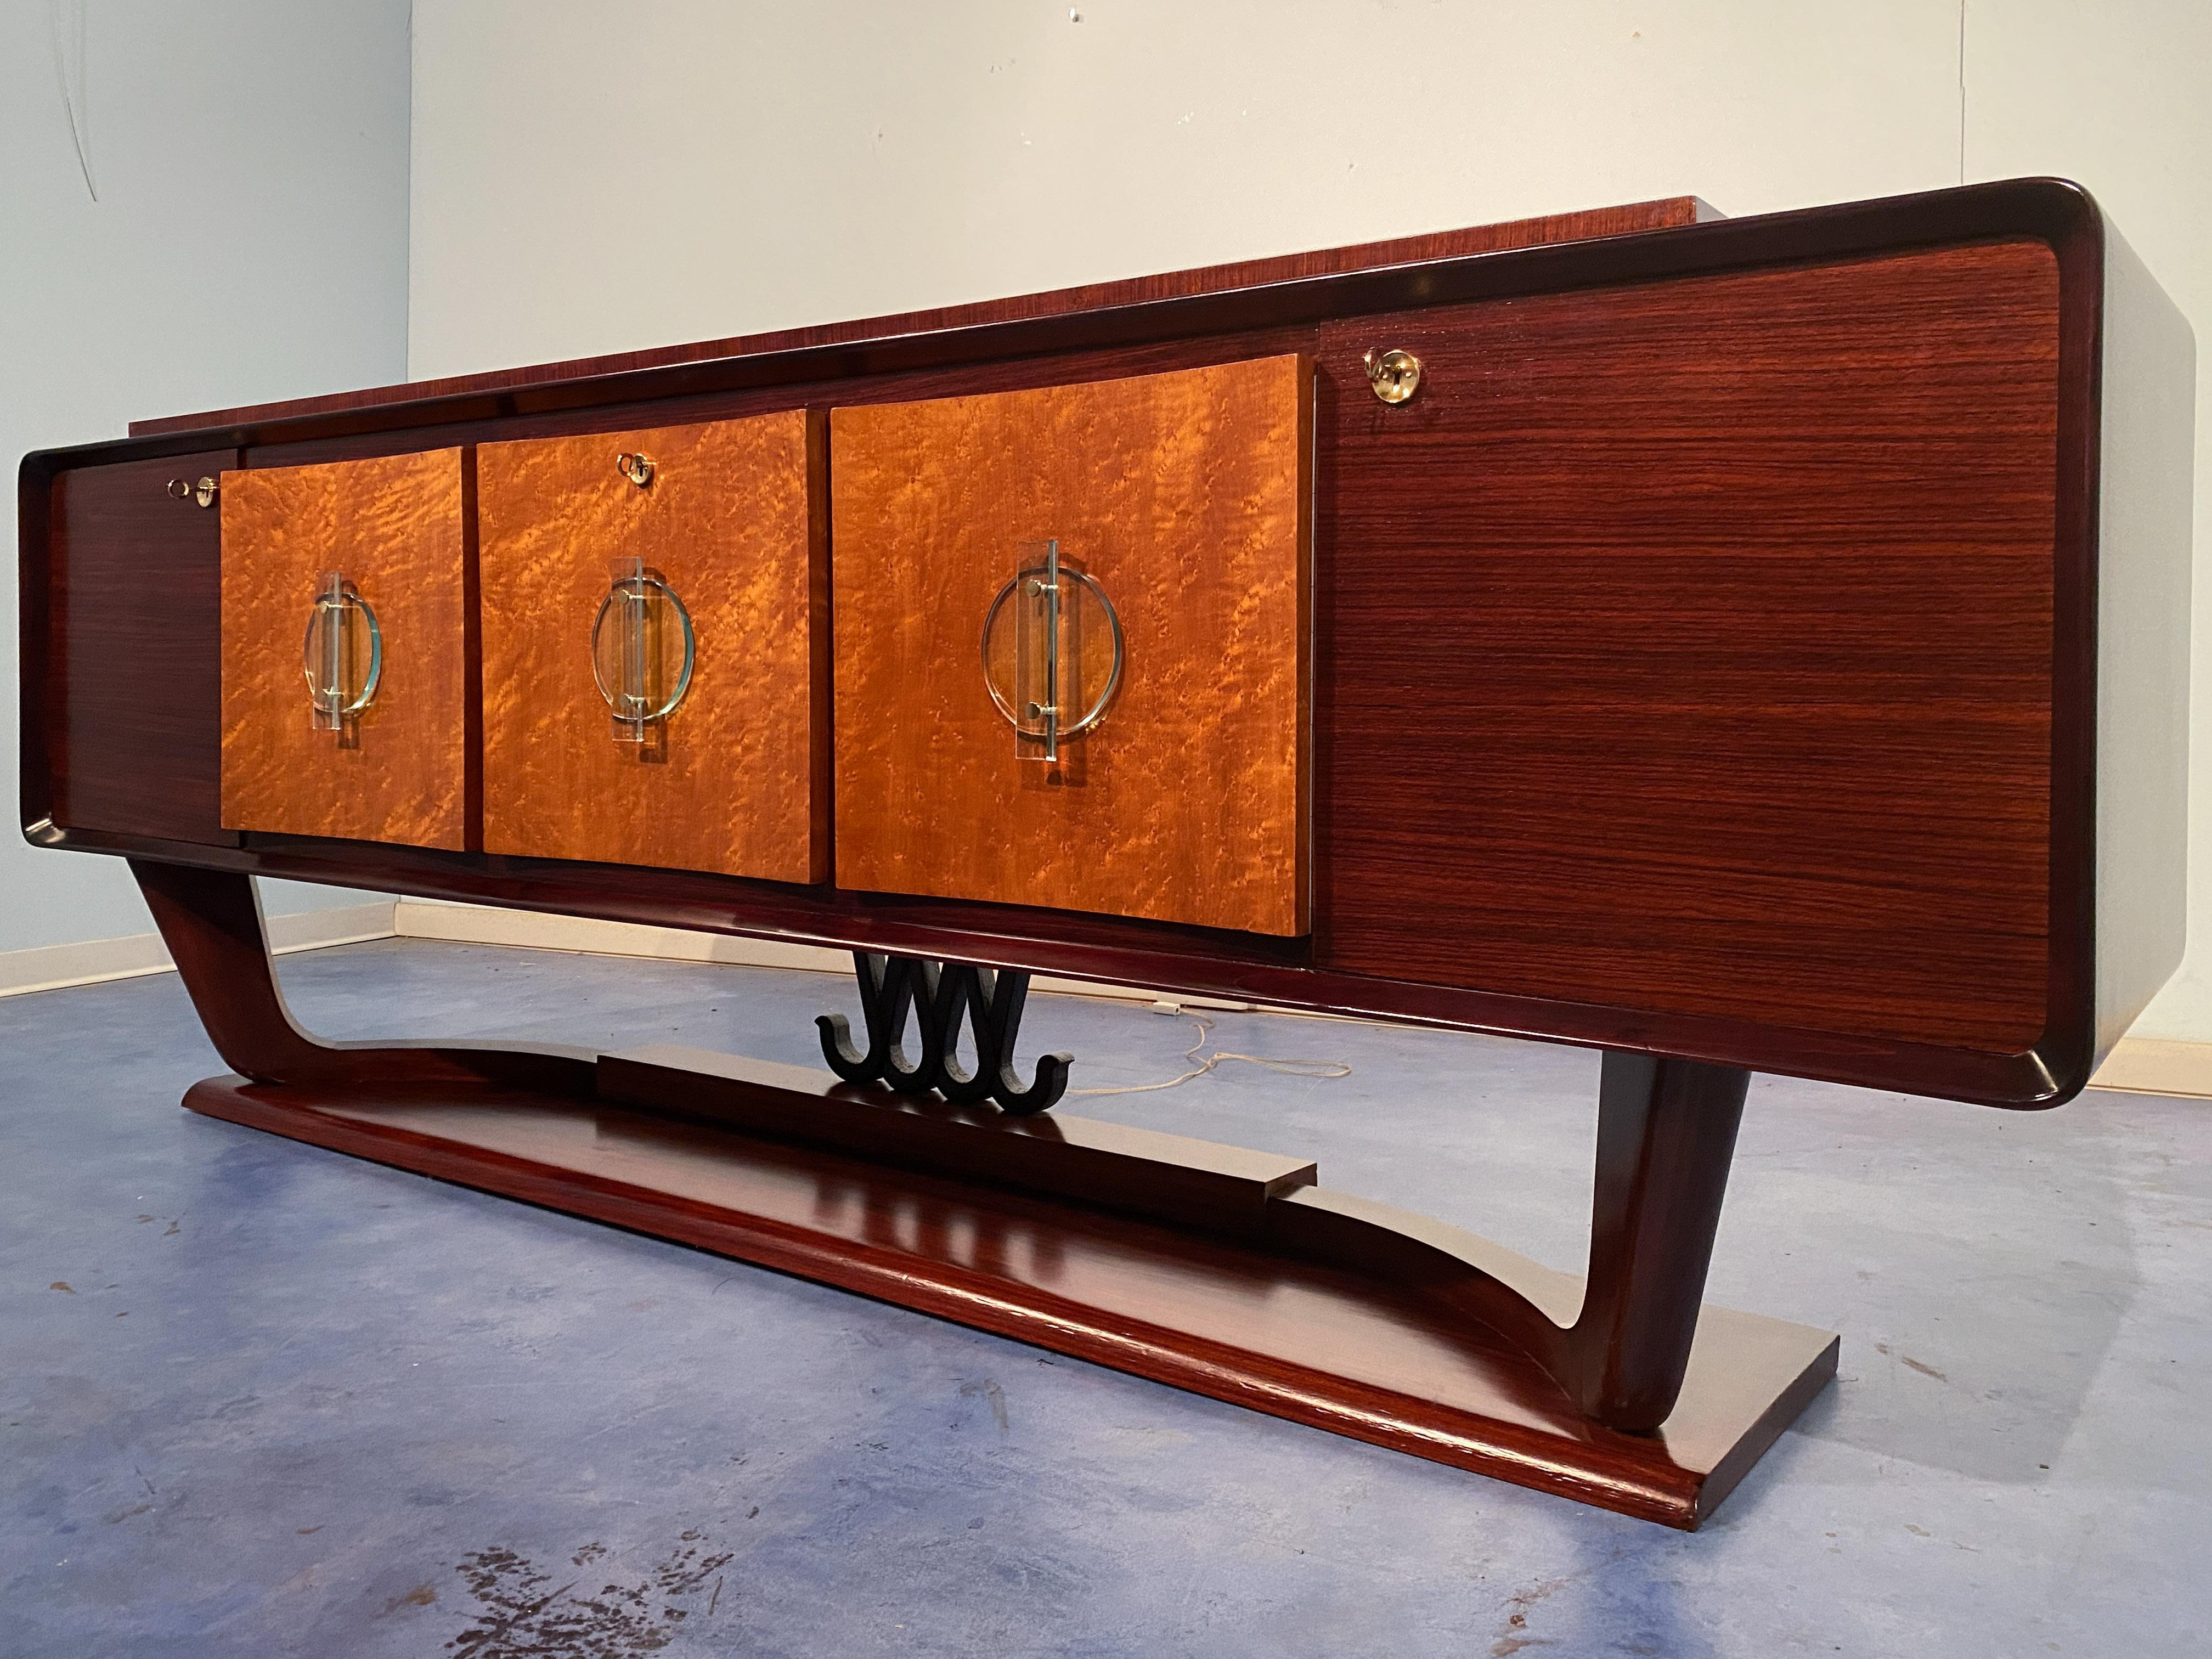 Italian Art Deco Sideboard with Bar Cabinet Attributed to Osvaldo Borsani, 1940s For Sale 1